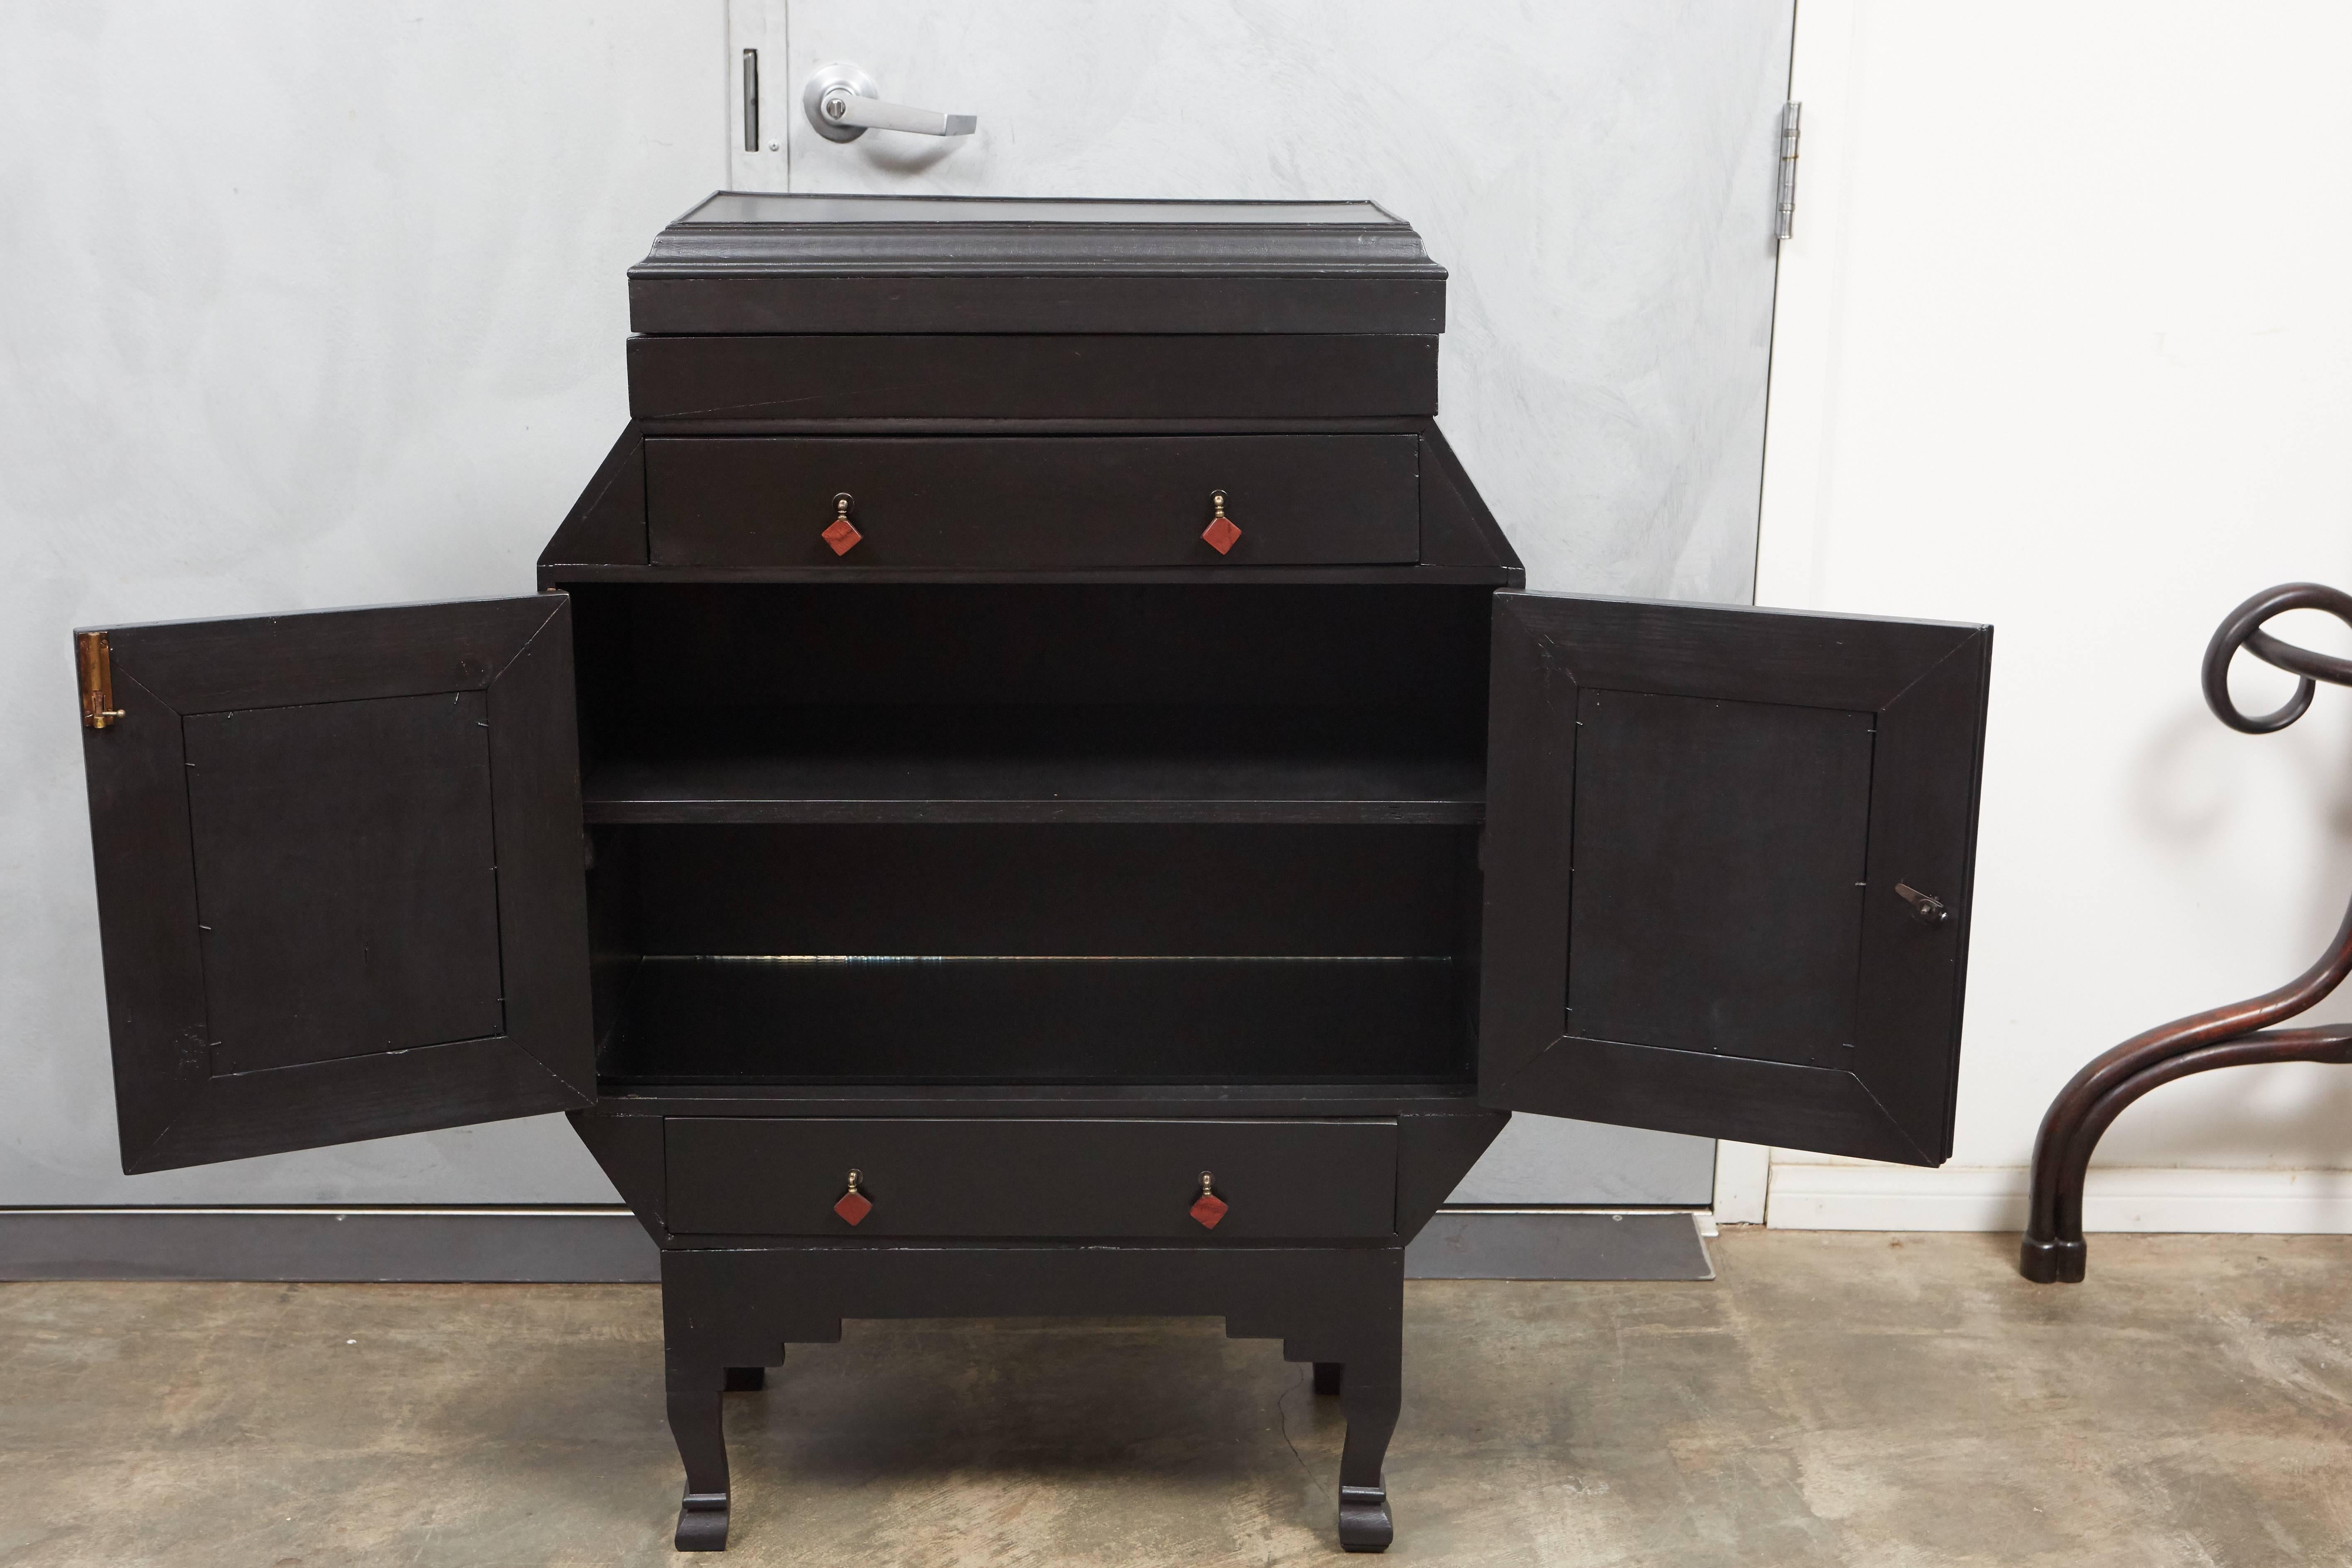 This 1920s Art Deco cabinet seems to be a one of a kind design with very interesting design and details. The cabinet has two drawers, two doors, two shelves and a lid that reveals a tray top inset with mirrors. Among the highlights of the piece's